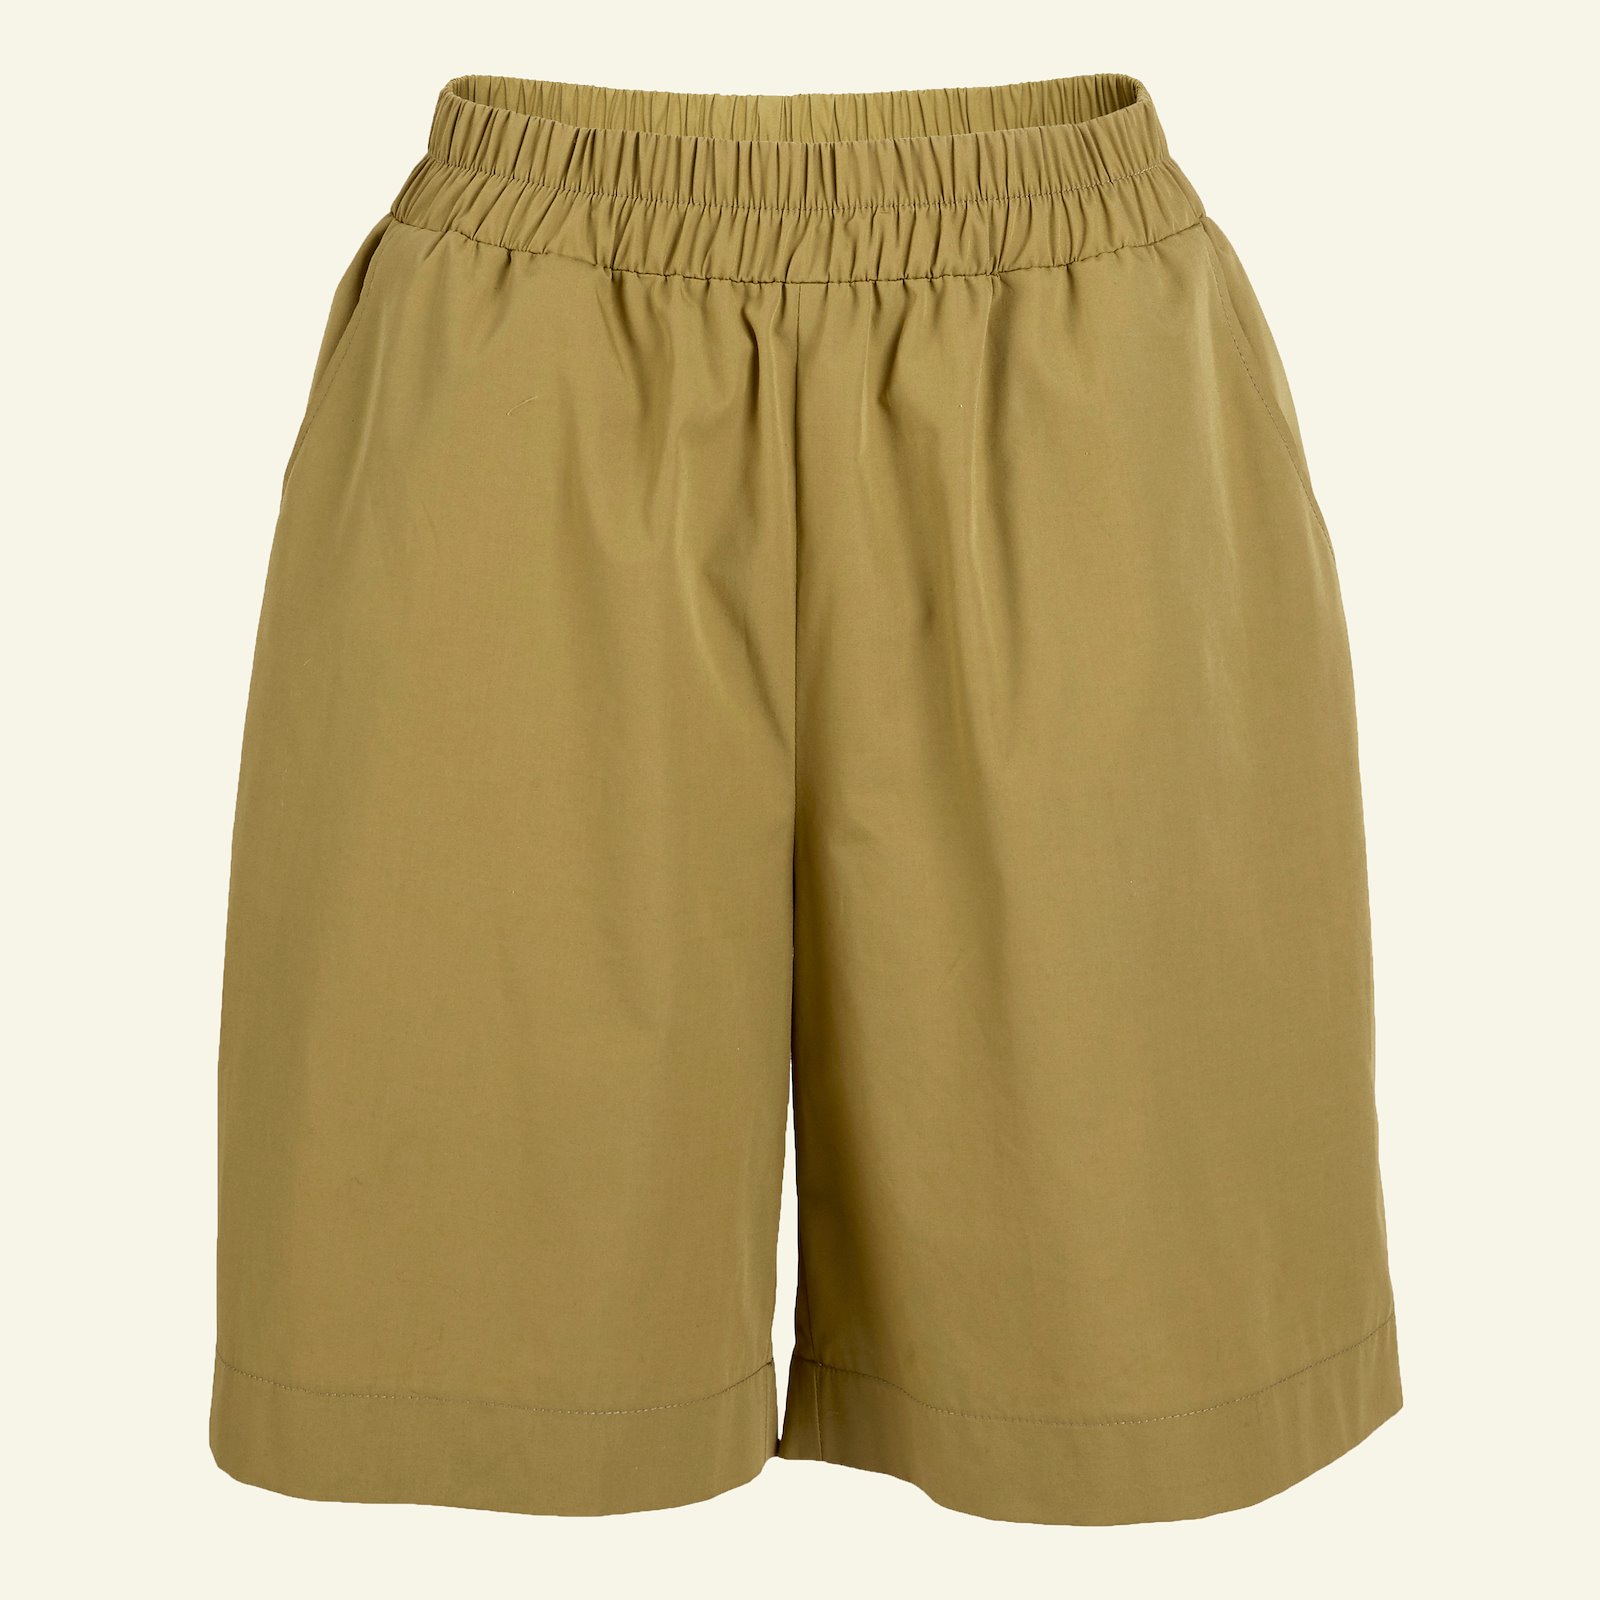 Wide trousers/shorts w. pockets, 42/14 p20051_501926_sskit